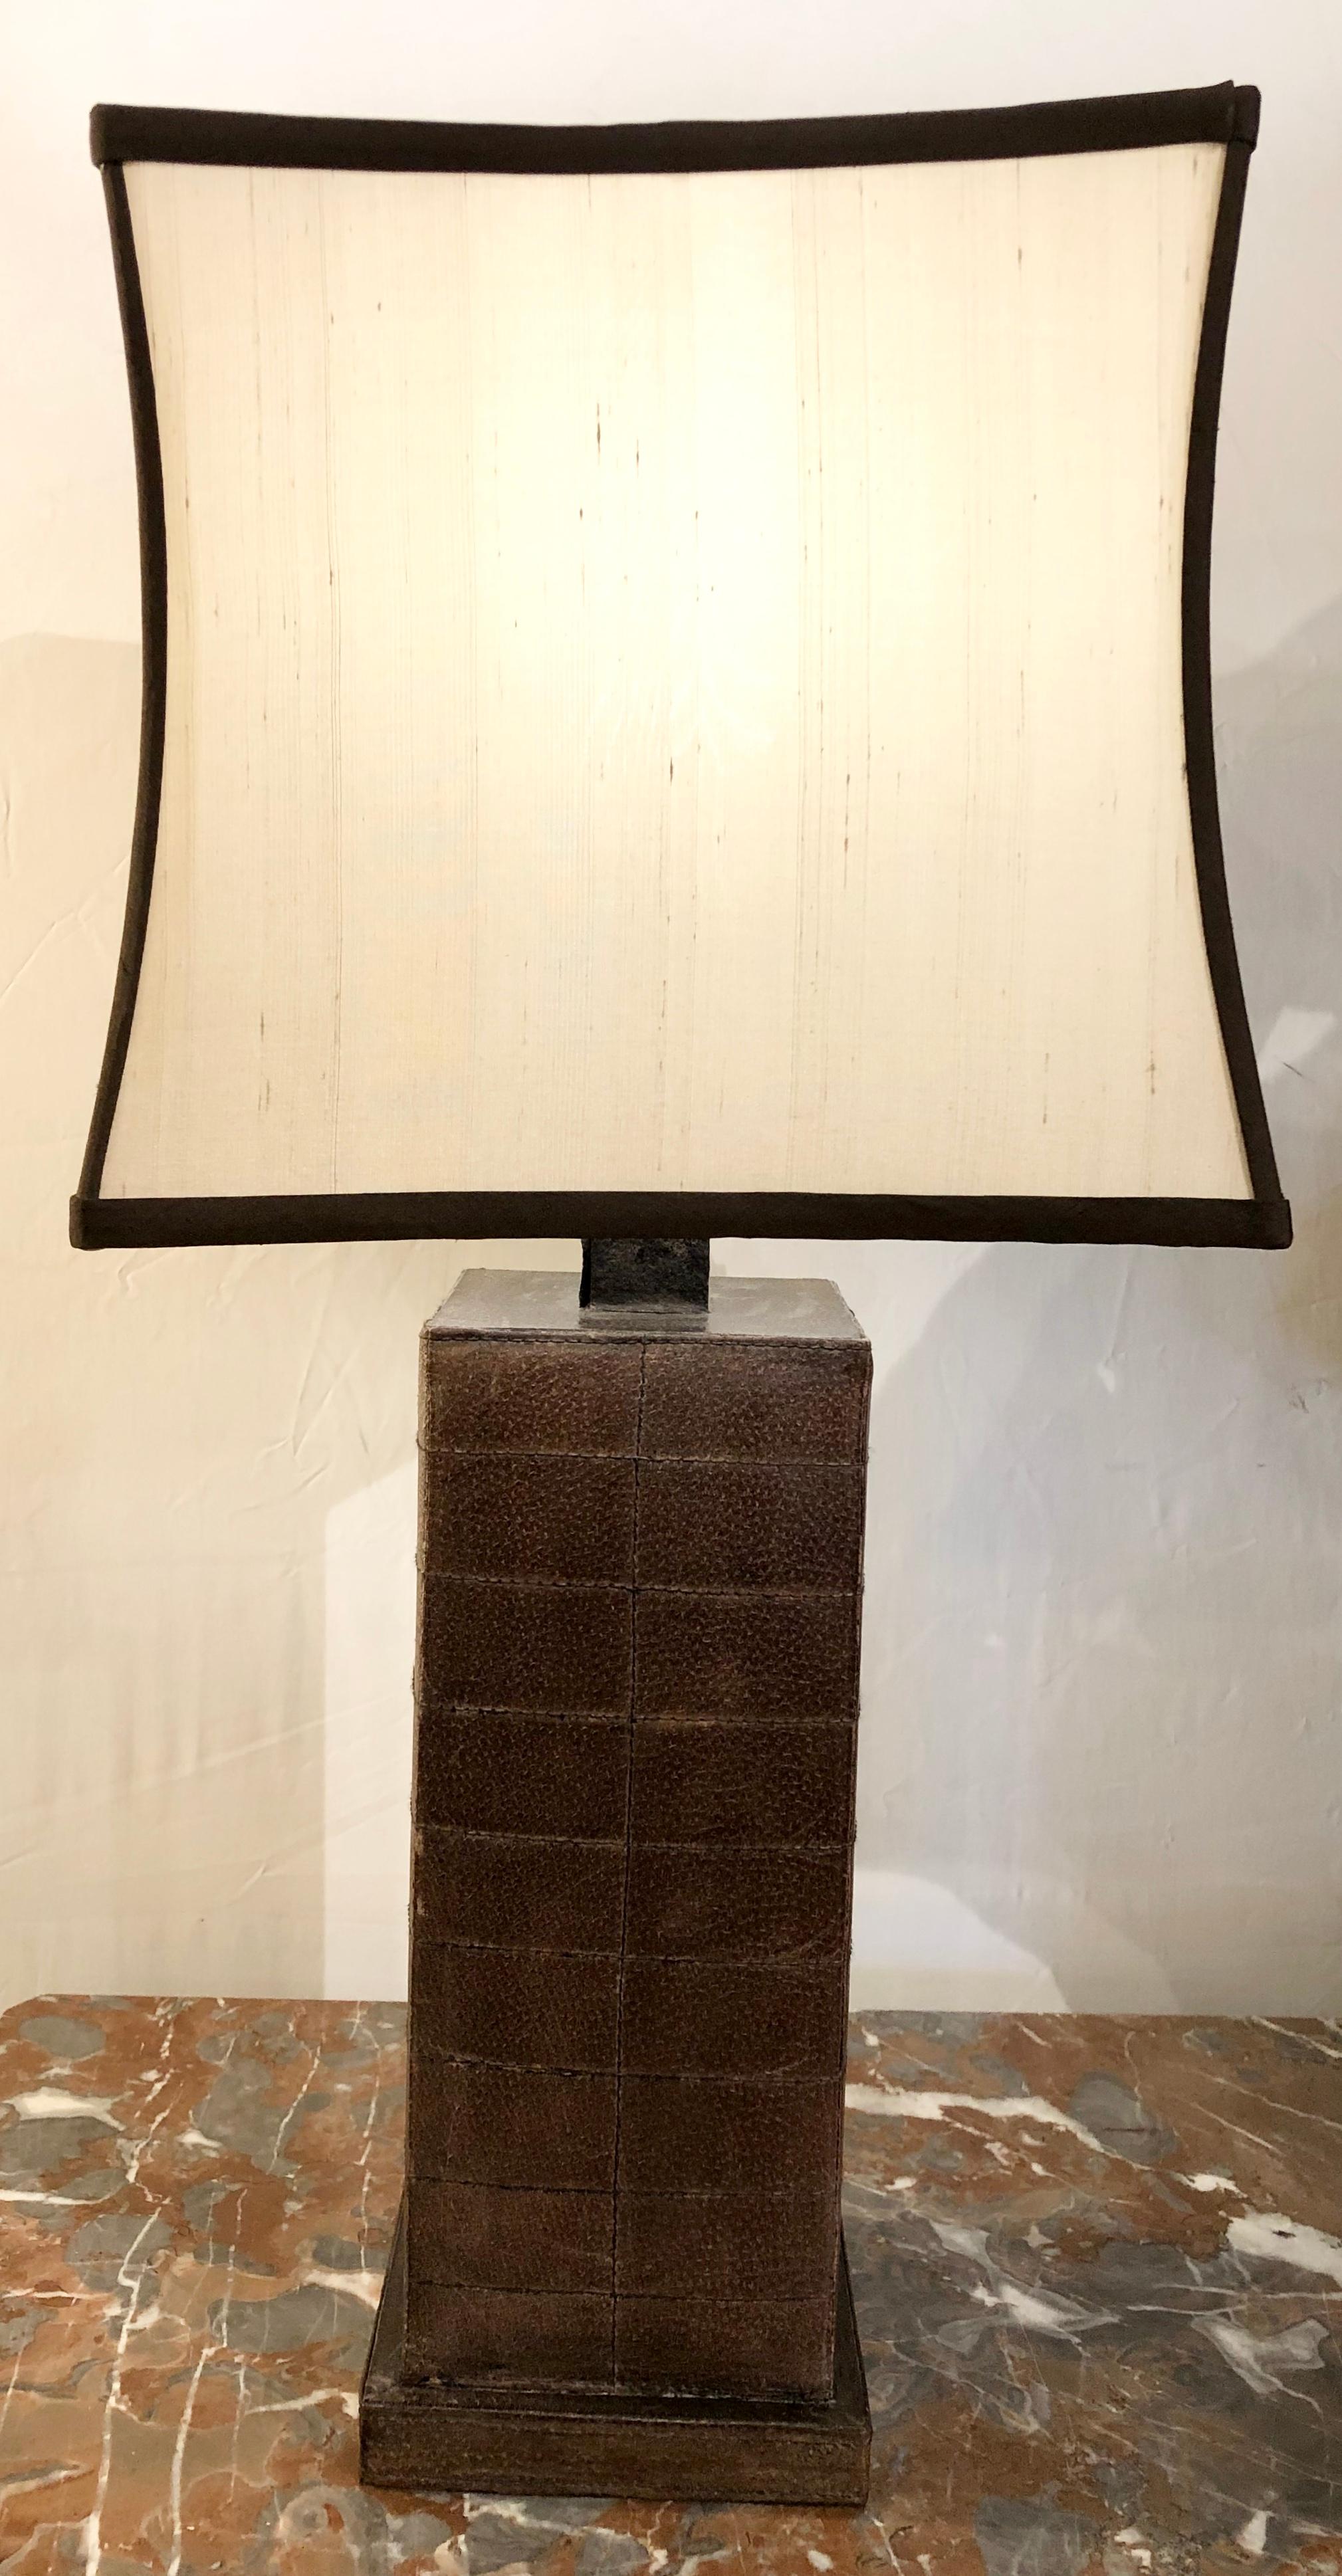 Pair of Karl Springer style leather table lamps with custom shades.